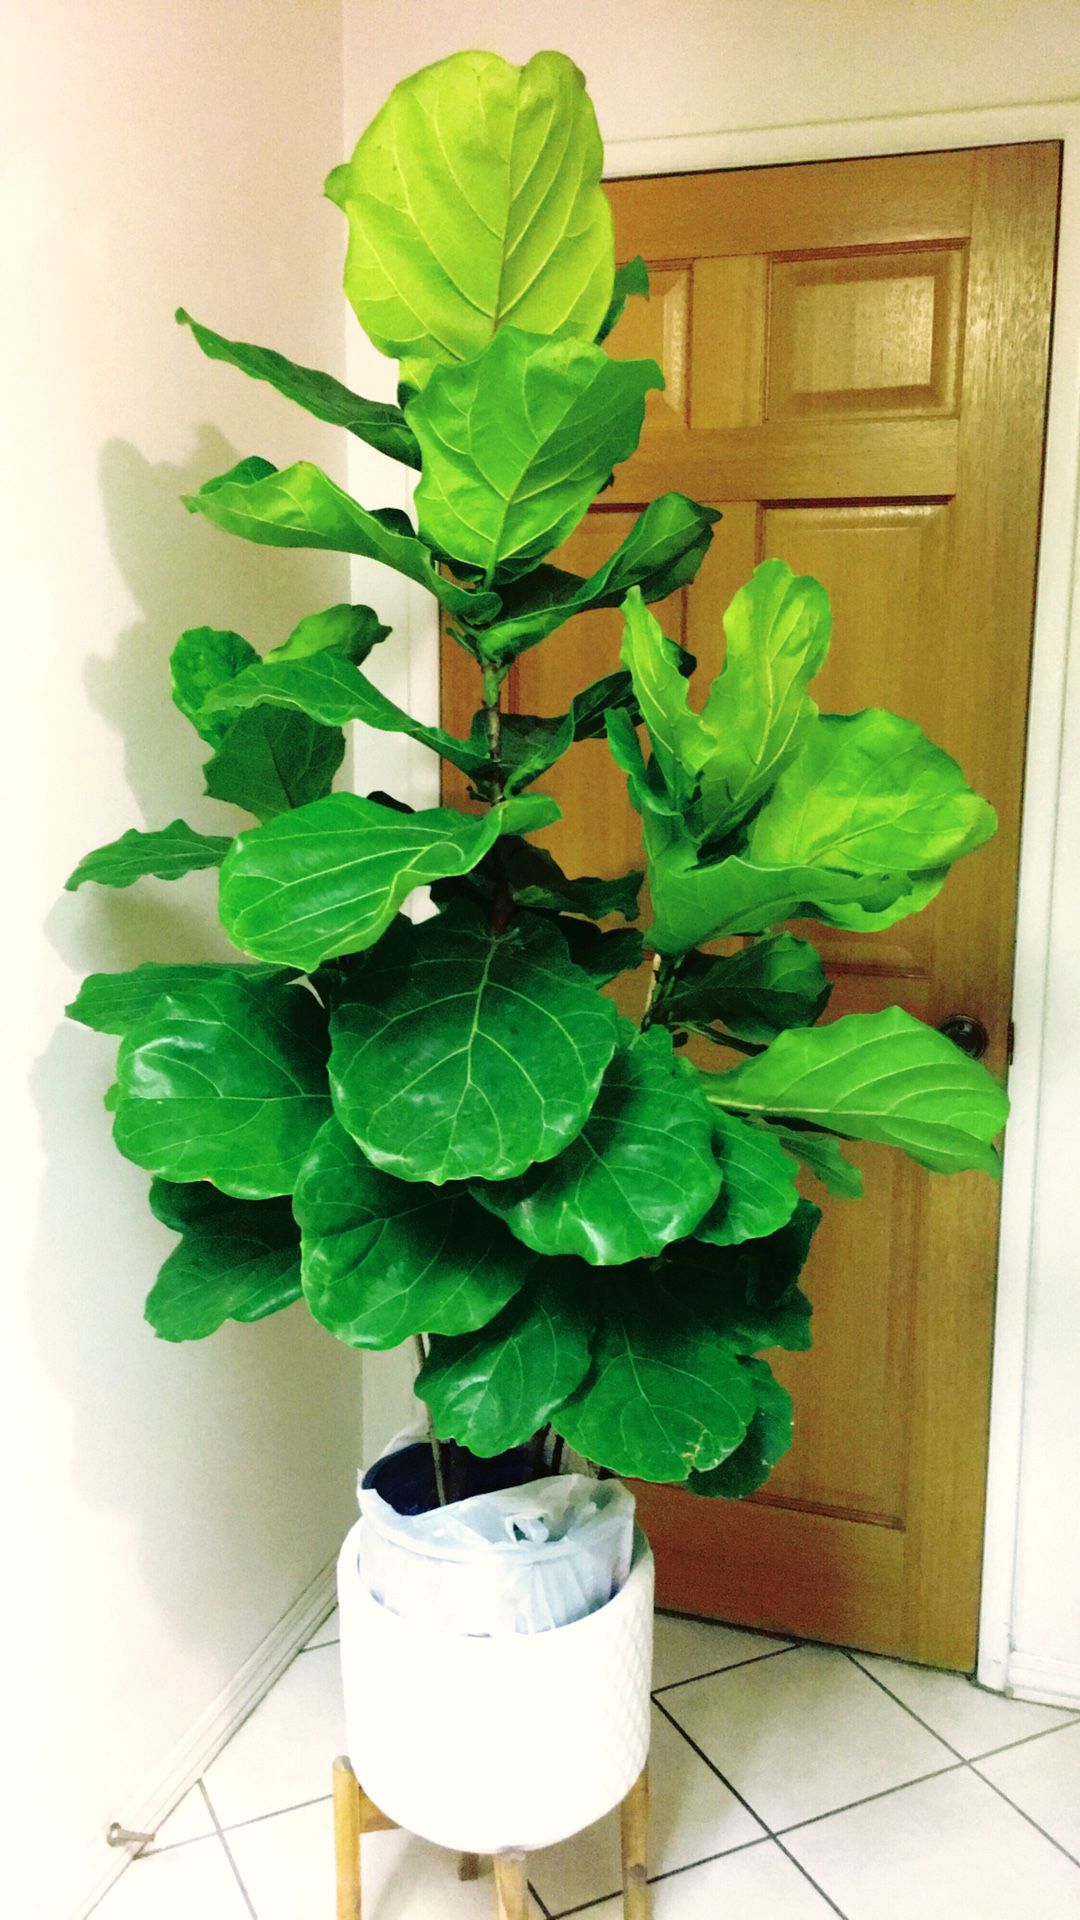 Fiddle Leaf Fig Plants - Over 5 Feet High Tall Plant - Planter Not Included